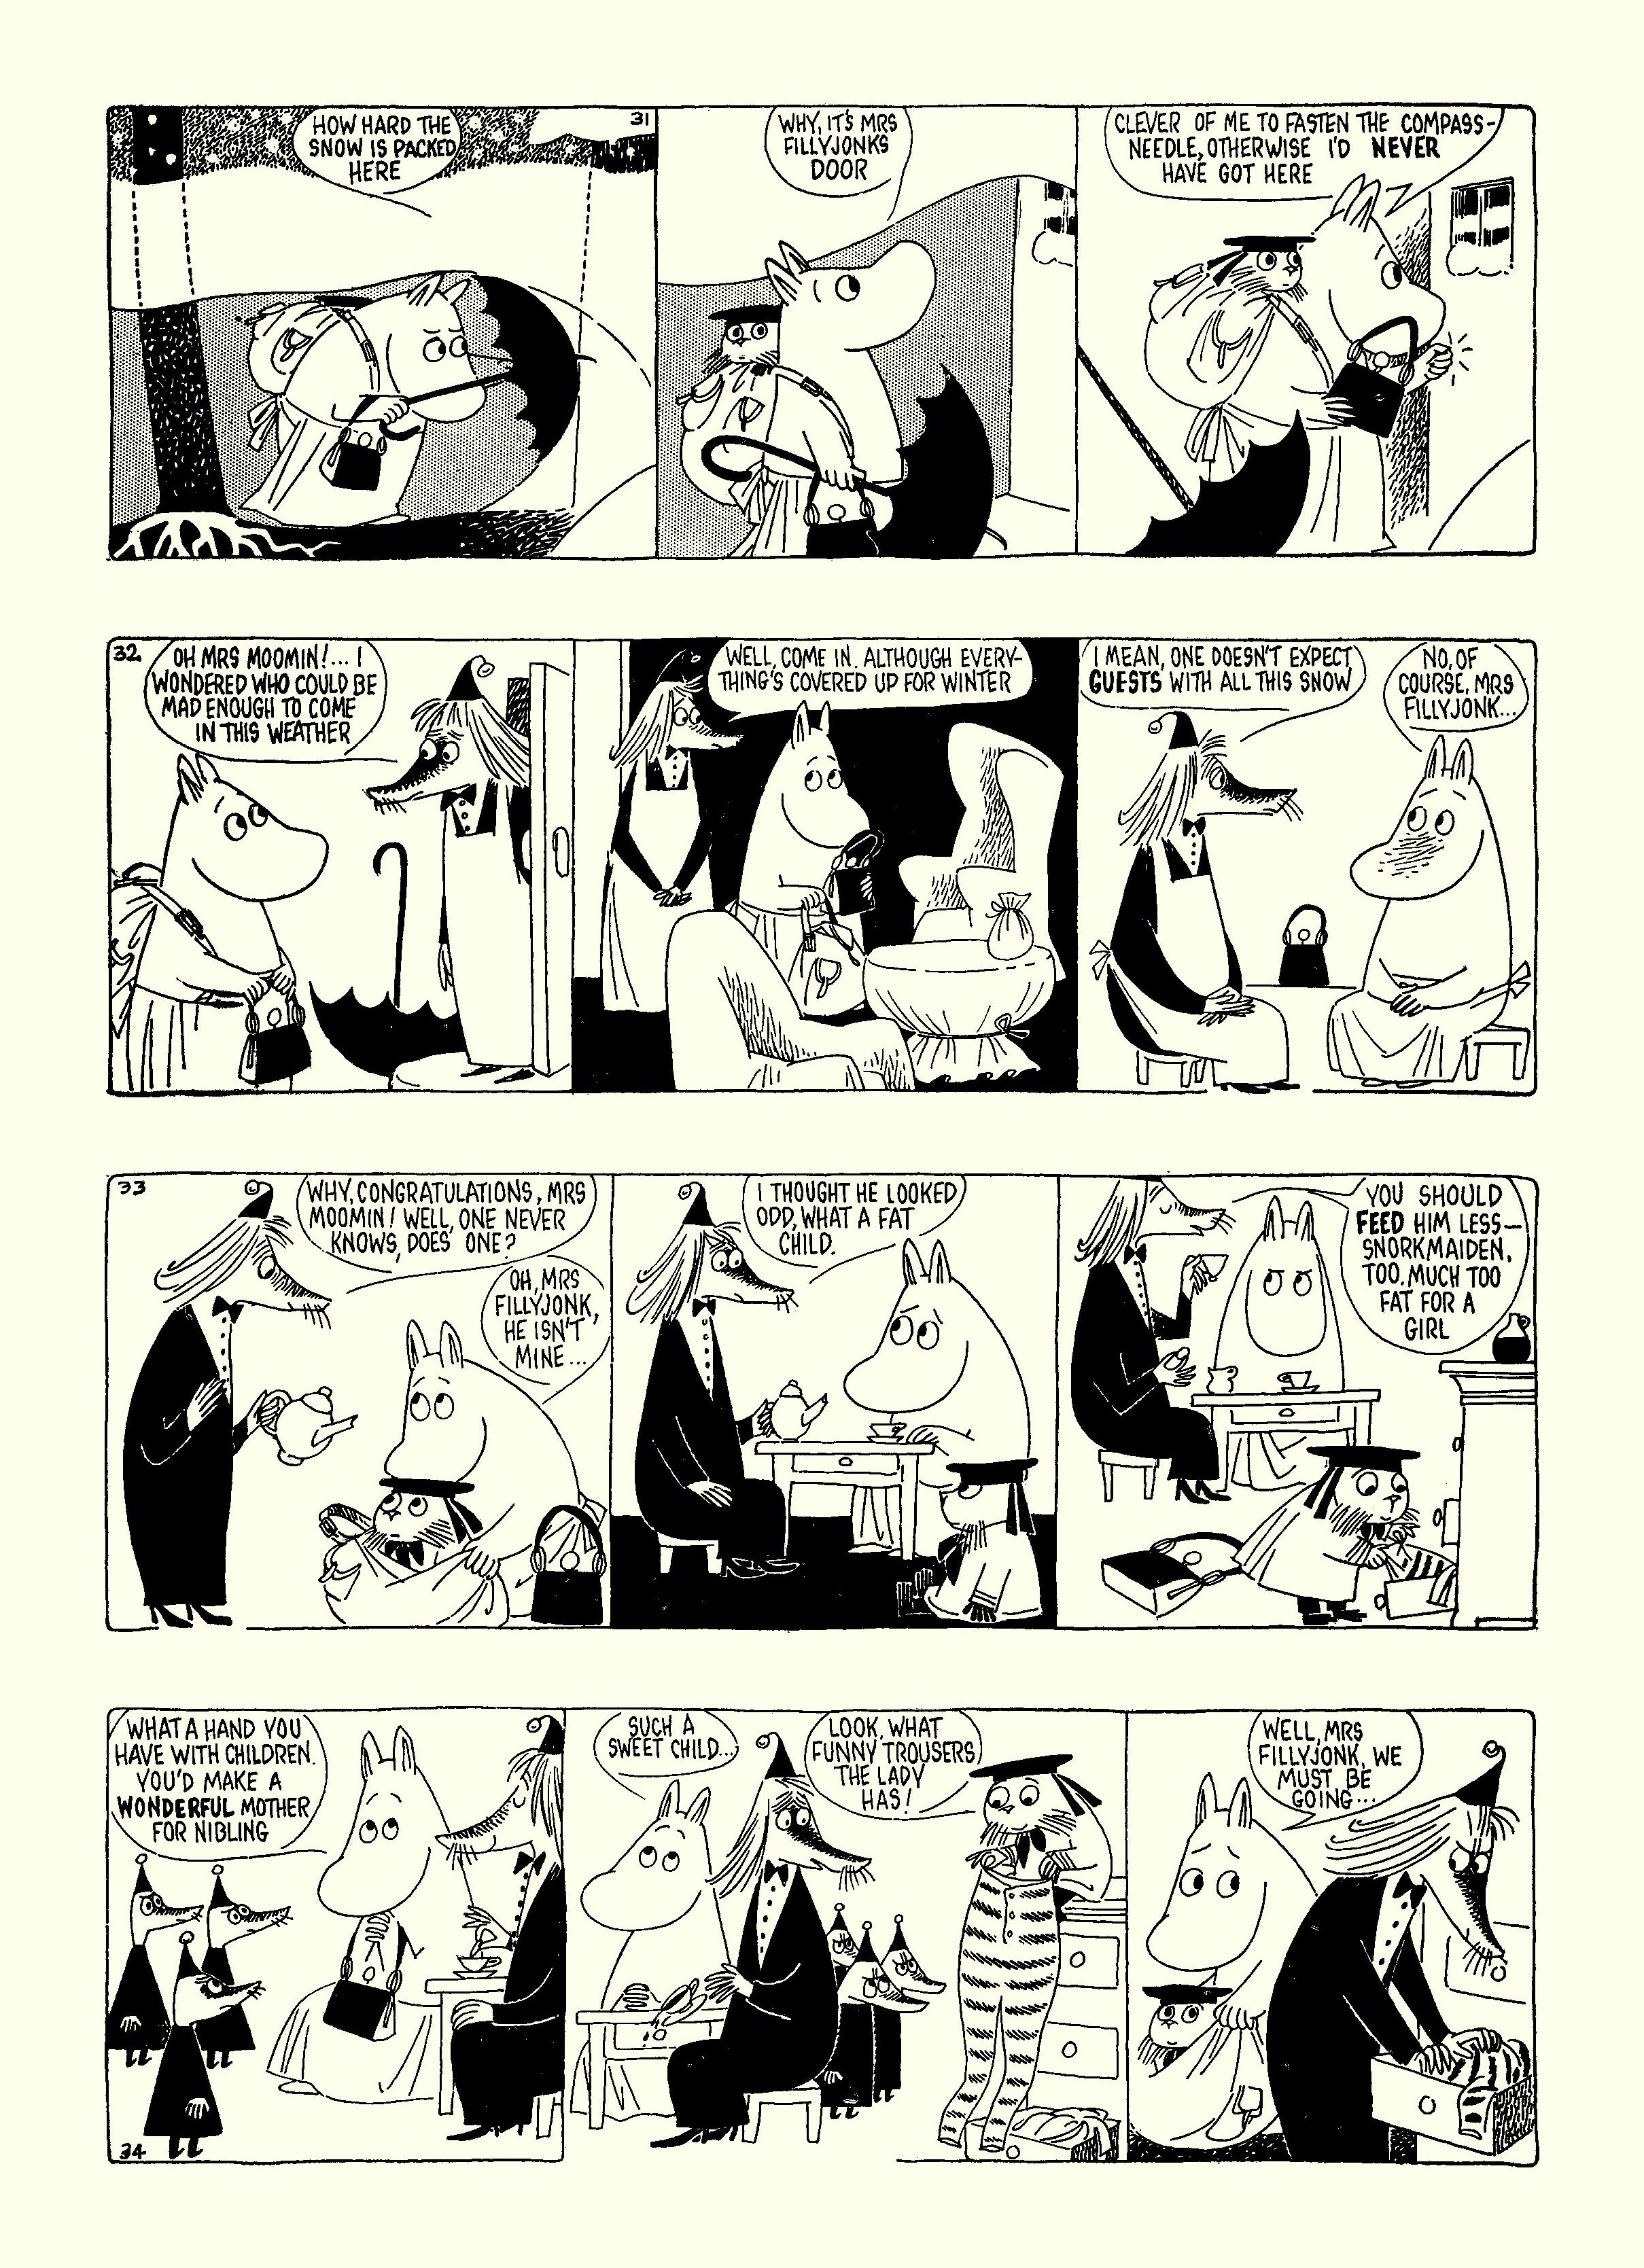 Read online Moomin: The Complete Tove Jansson Comic Strip comic -  Issue # TPB 5 - 14